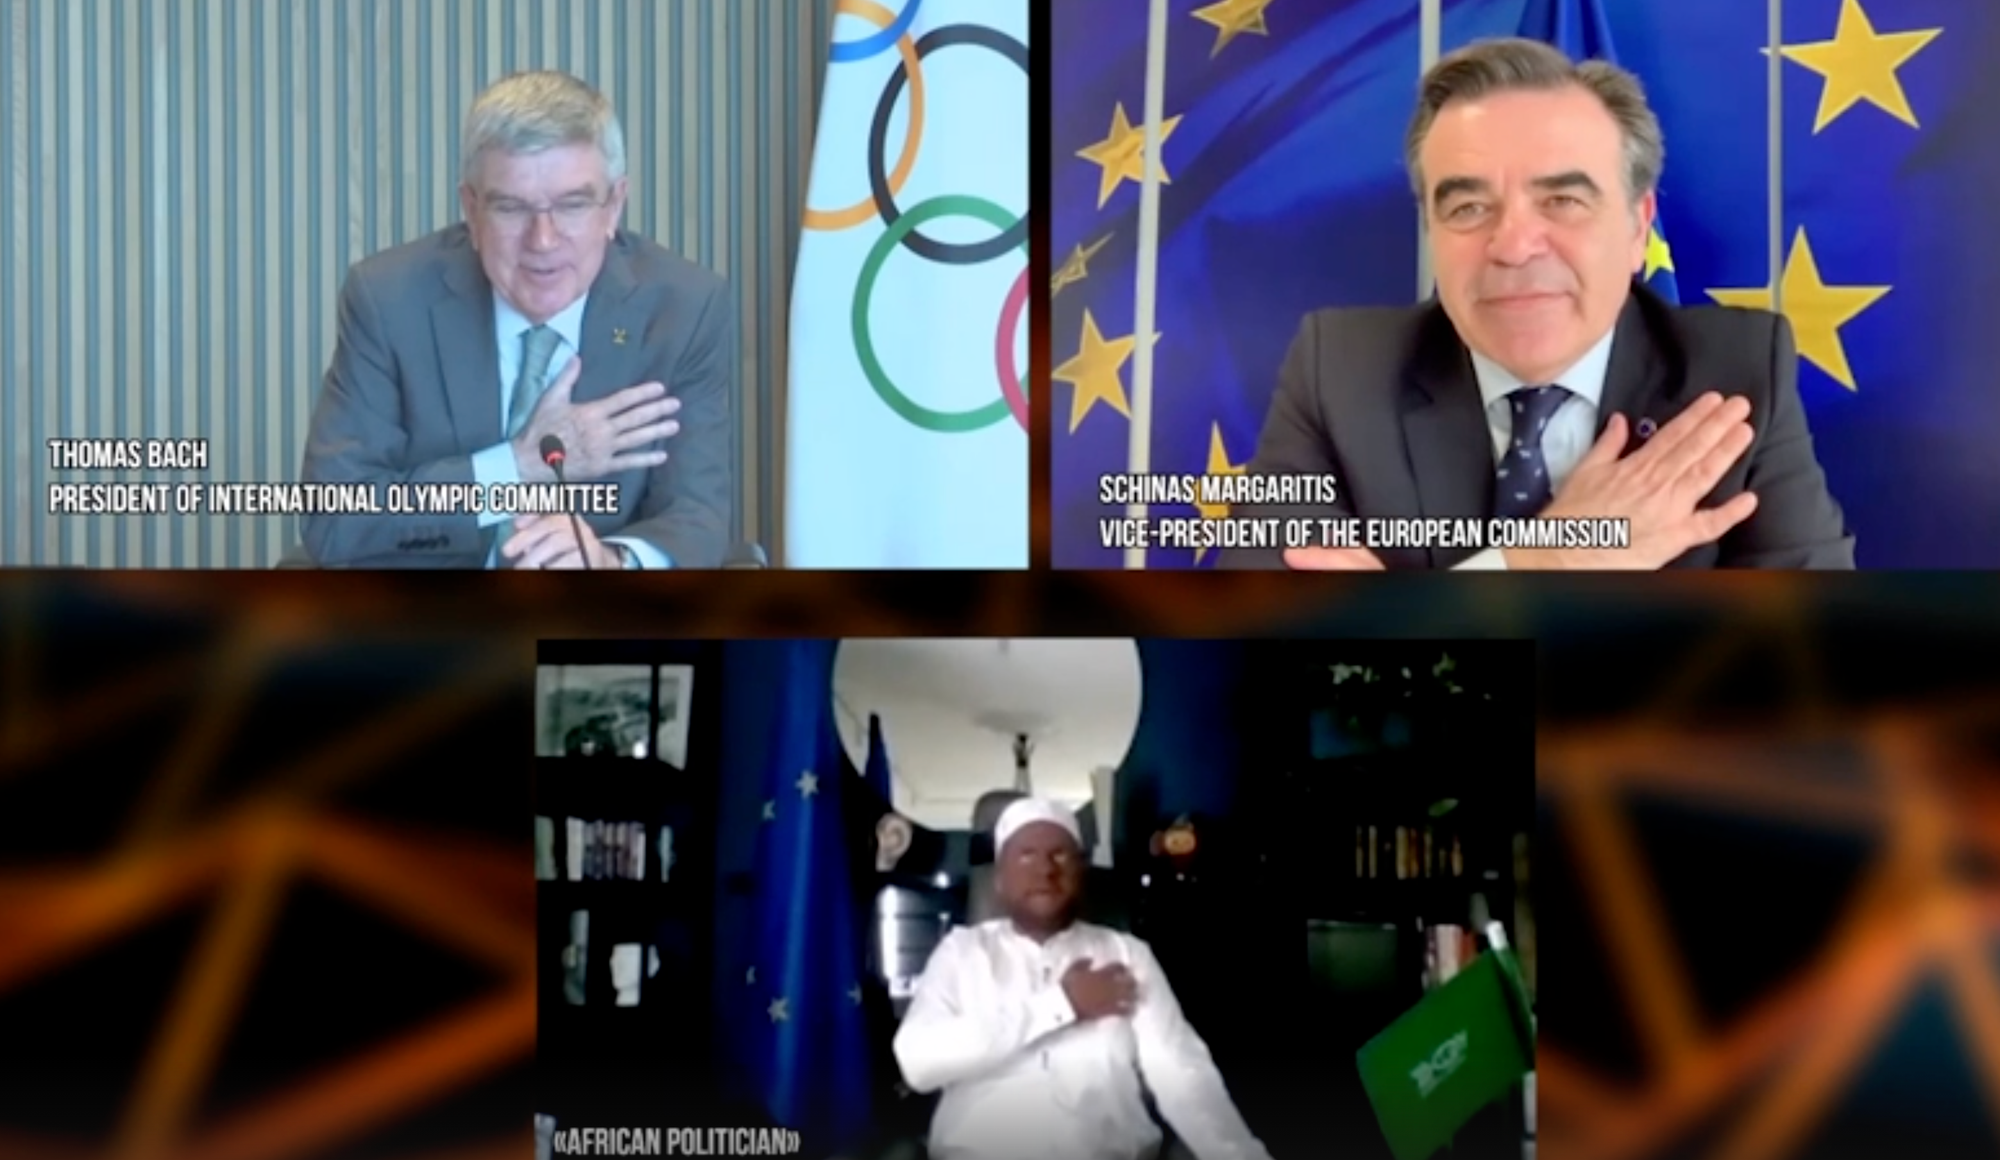 Indiscreet and unprofessional: the IOC Sun King in a prank conversation with an alleged African politician